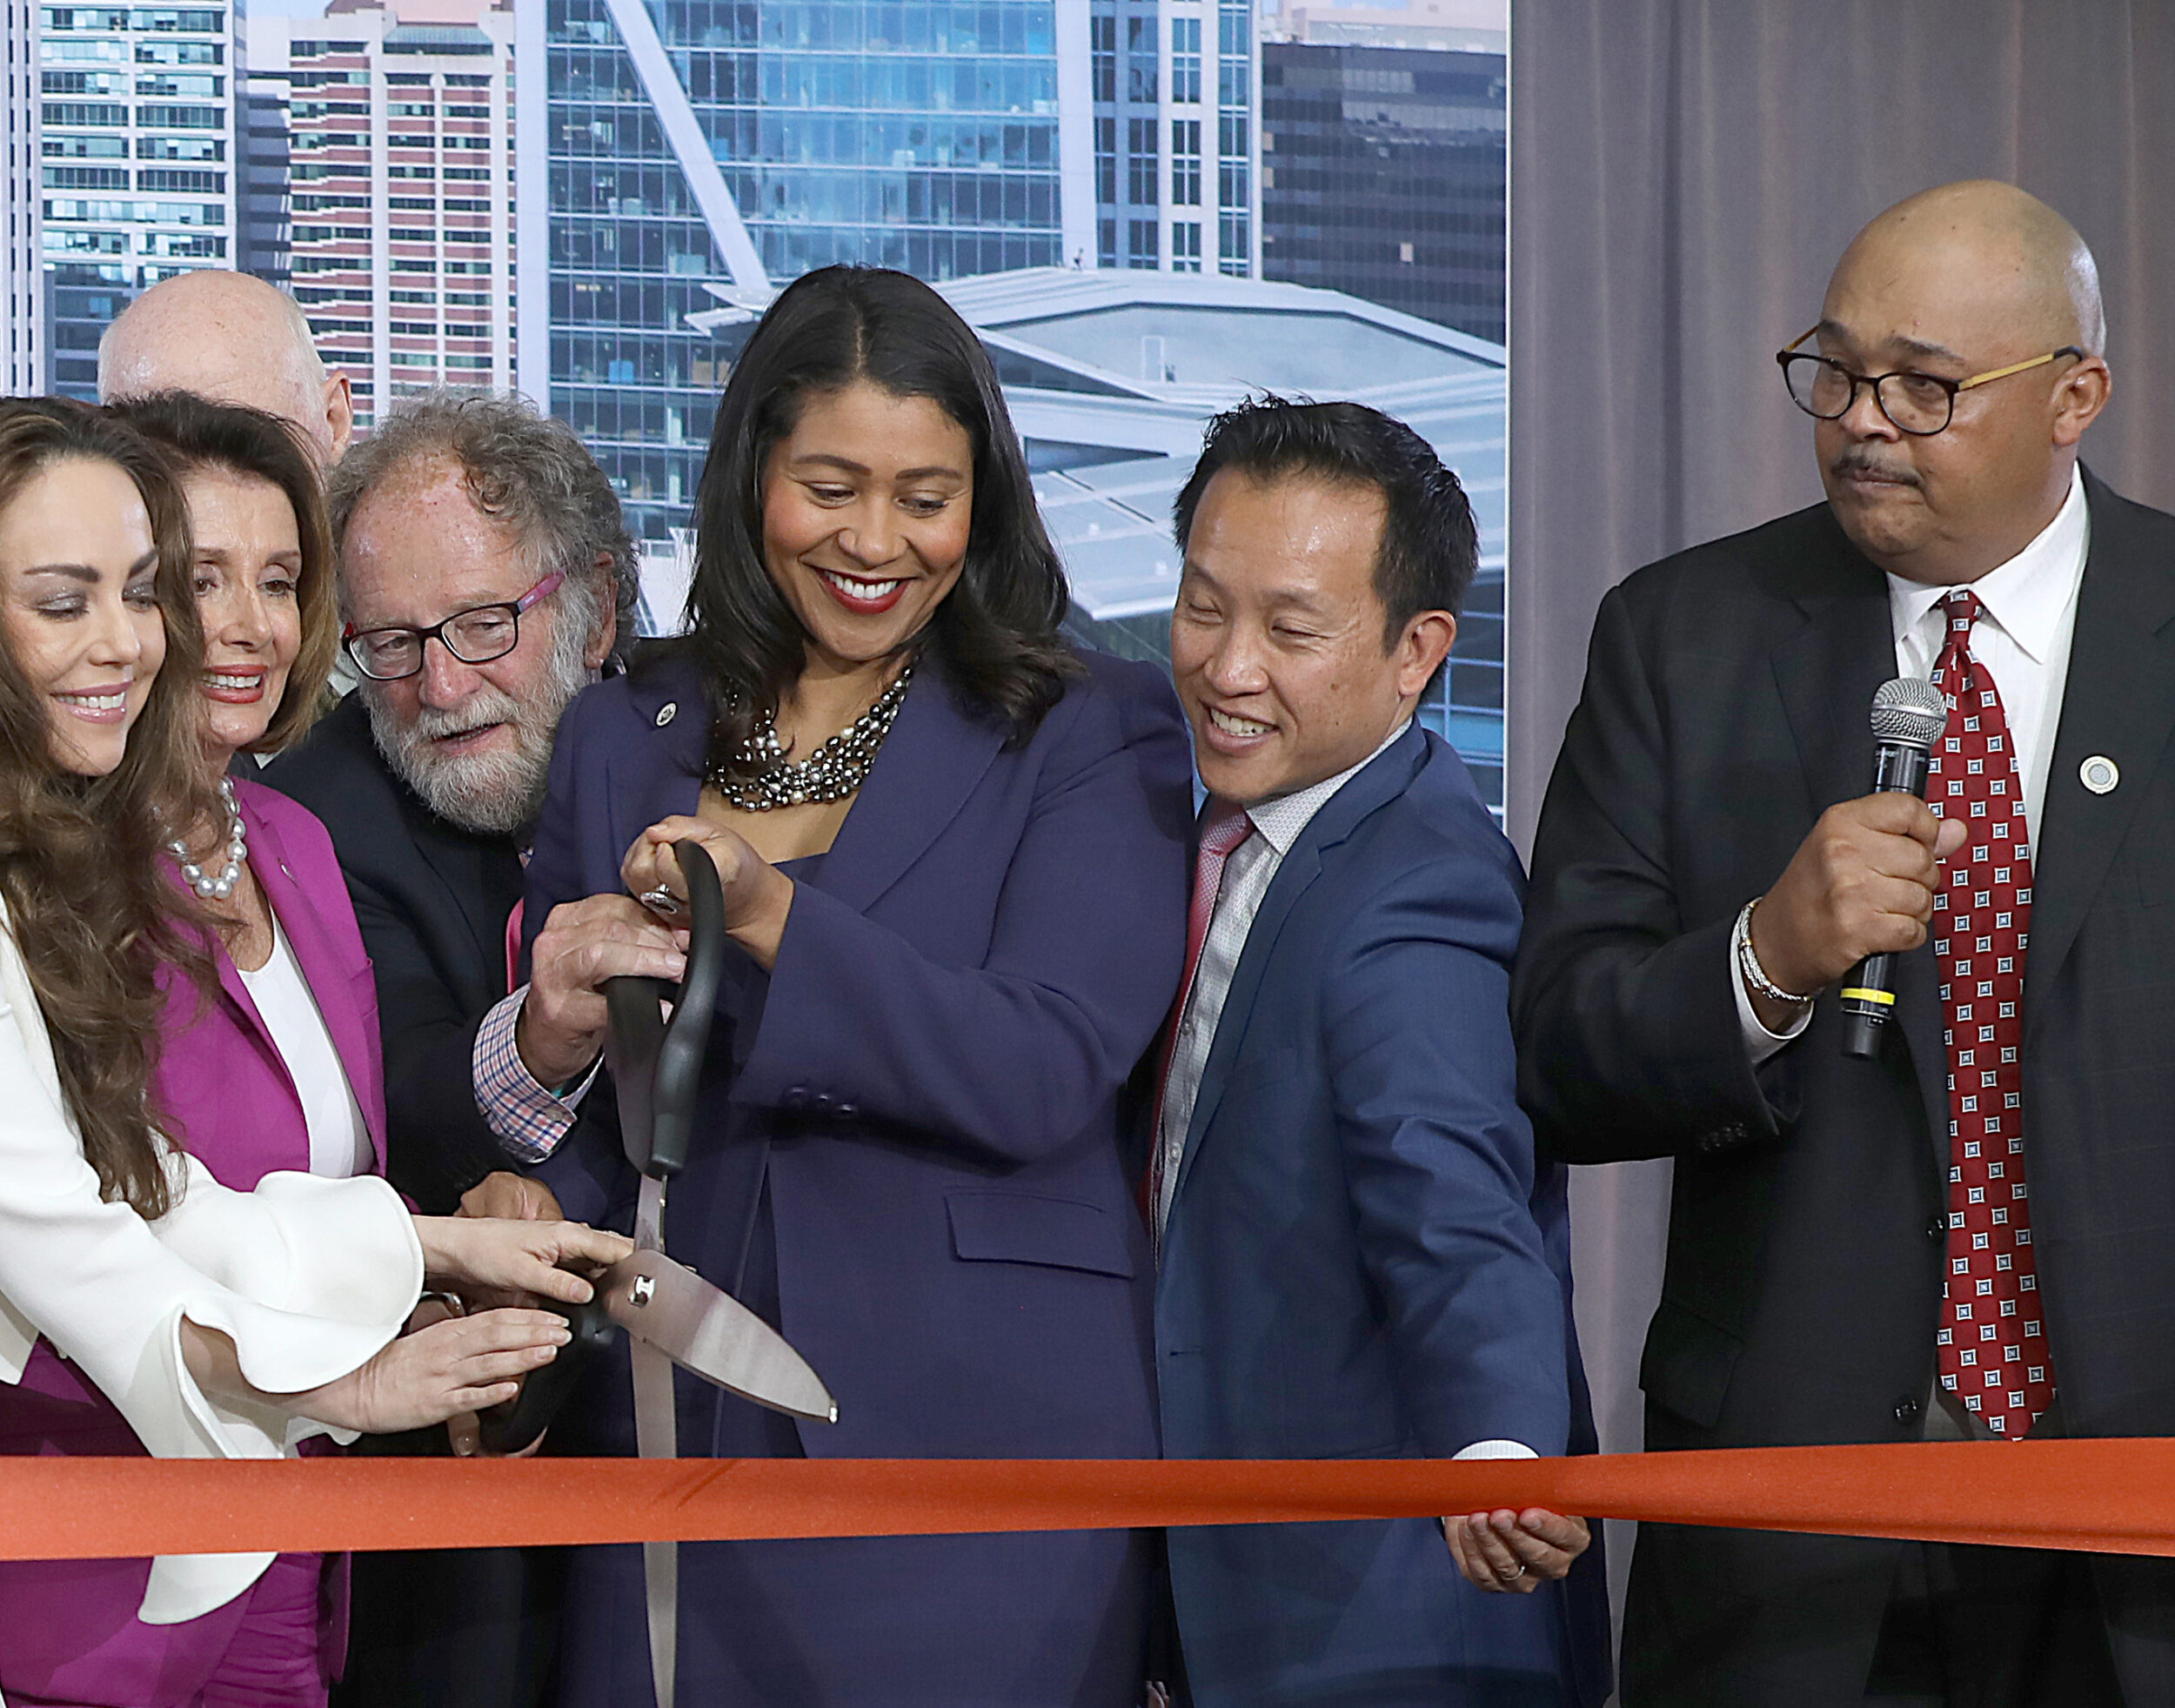 San Francisco Mayor London Breed, center, and other local and state officials—including then-Public Works Director Mohammed Nuru, far right—take part in a ribbon-cutting ceremony at Salesforce Transit Center on Aug. 10, 2018.